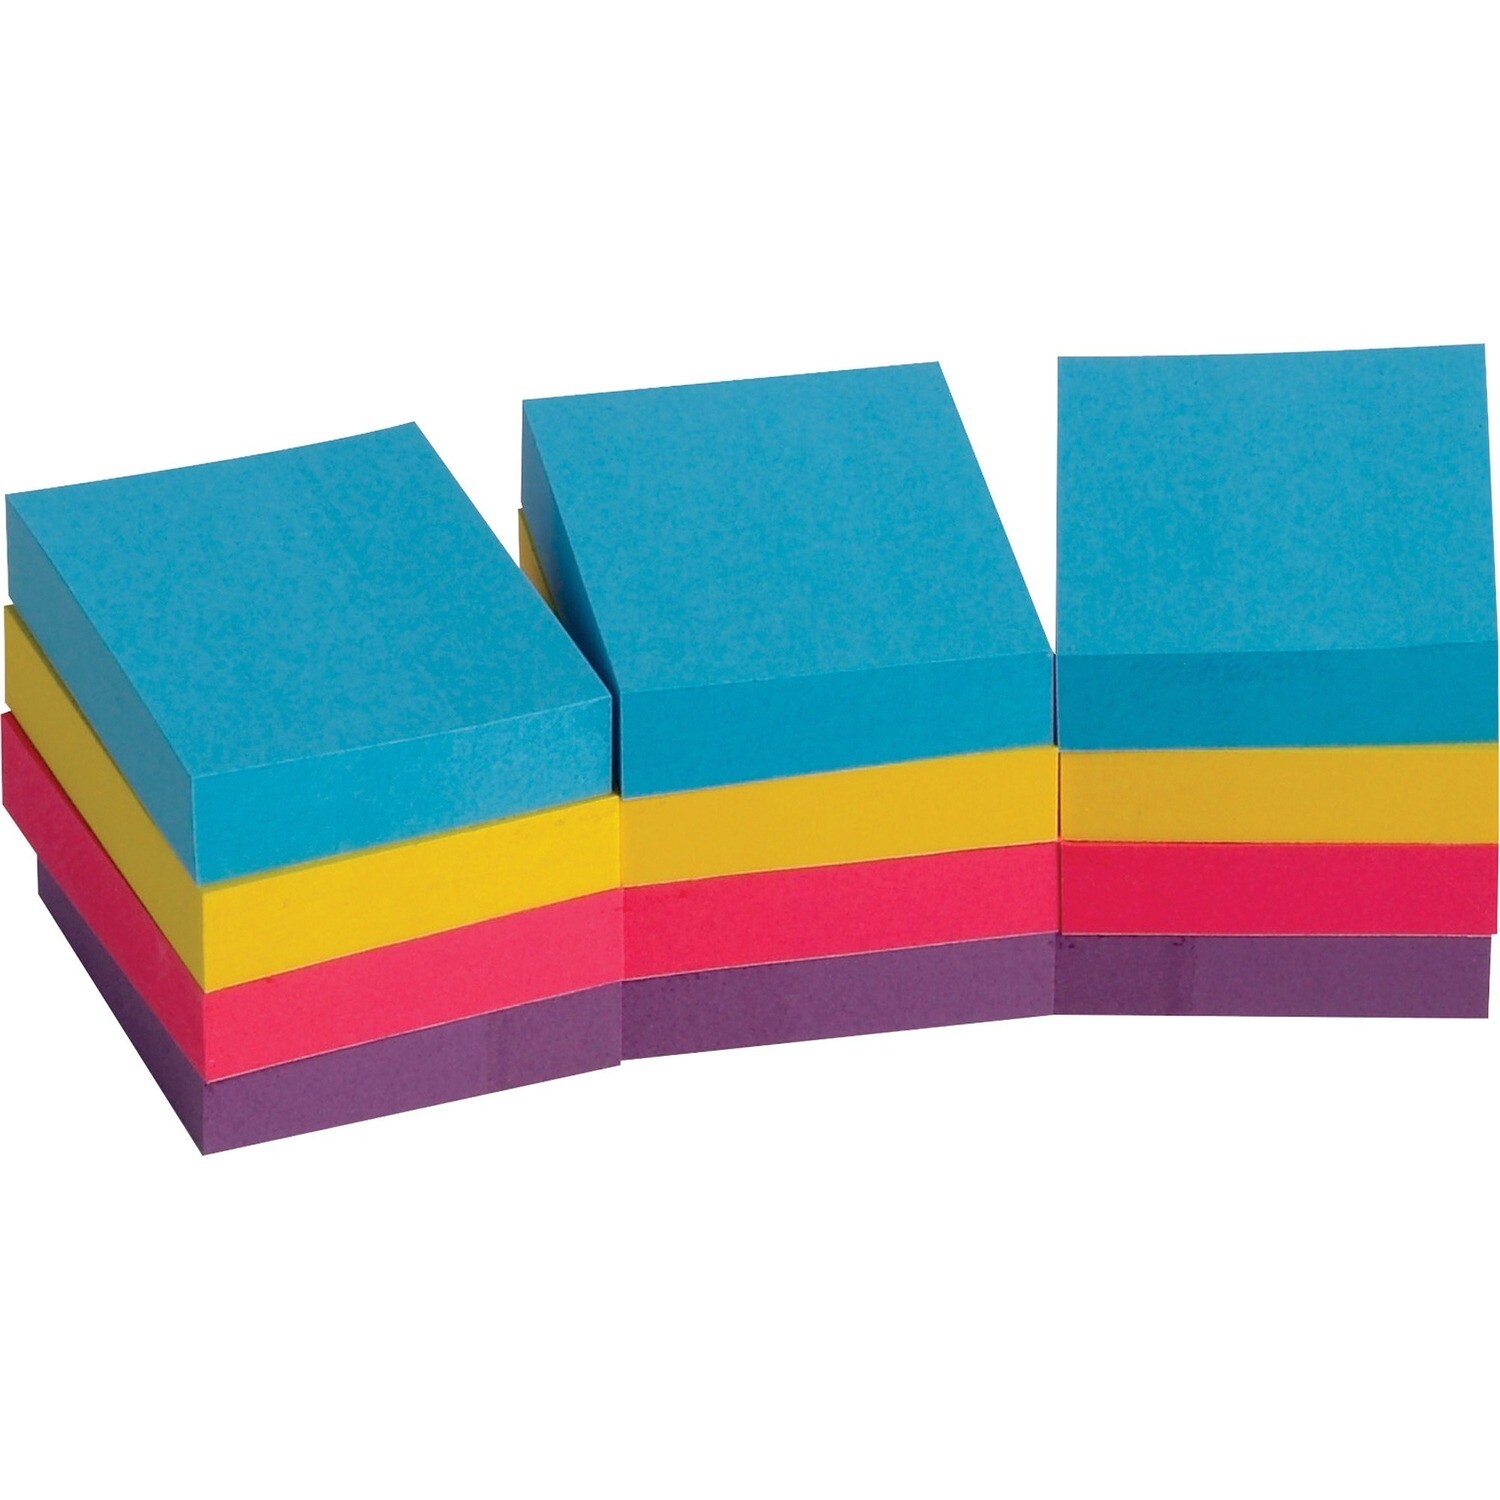 Adhesive Note, Extreme Colour 1.5" x 2", 12 Pack